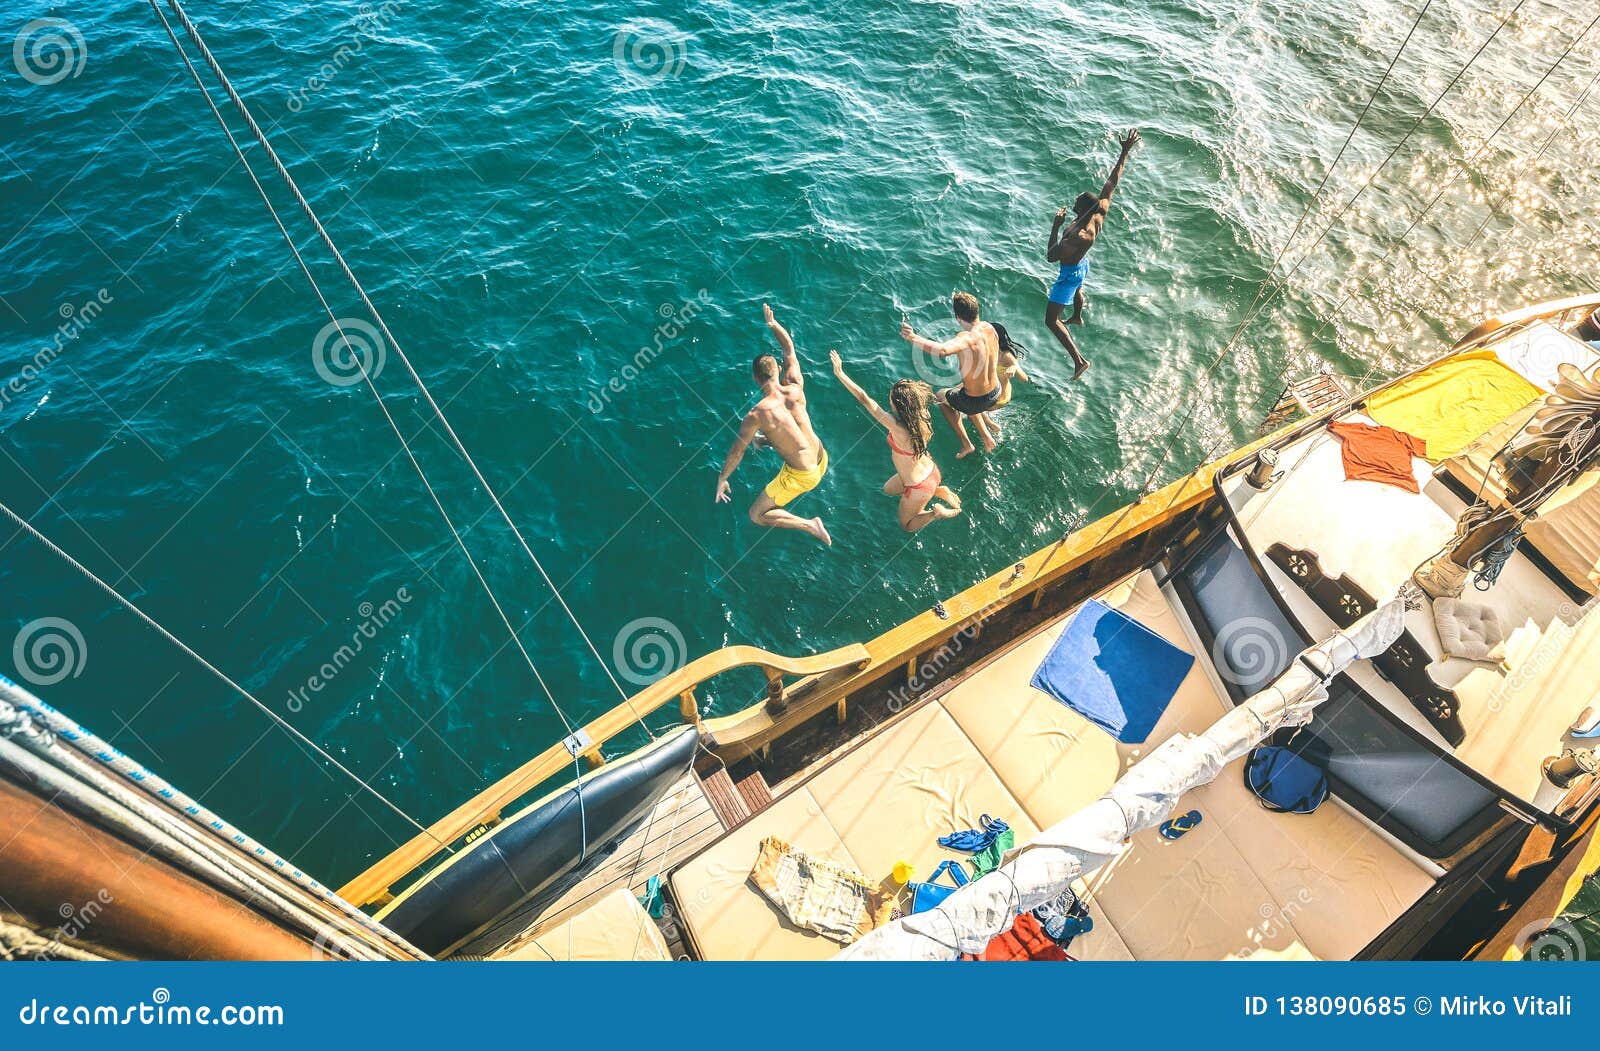 aerial view of happy millenial friends jumping from sailboat on sea ocean trip - rich guys and girls having fun together in